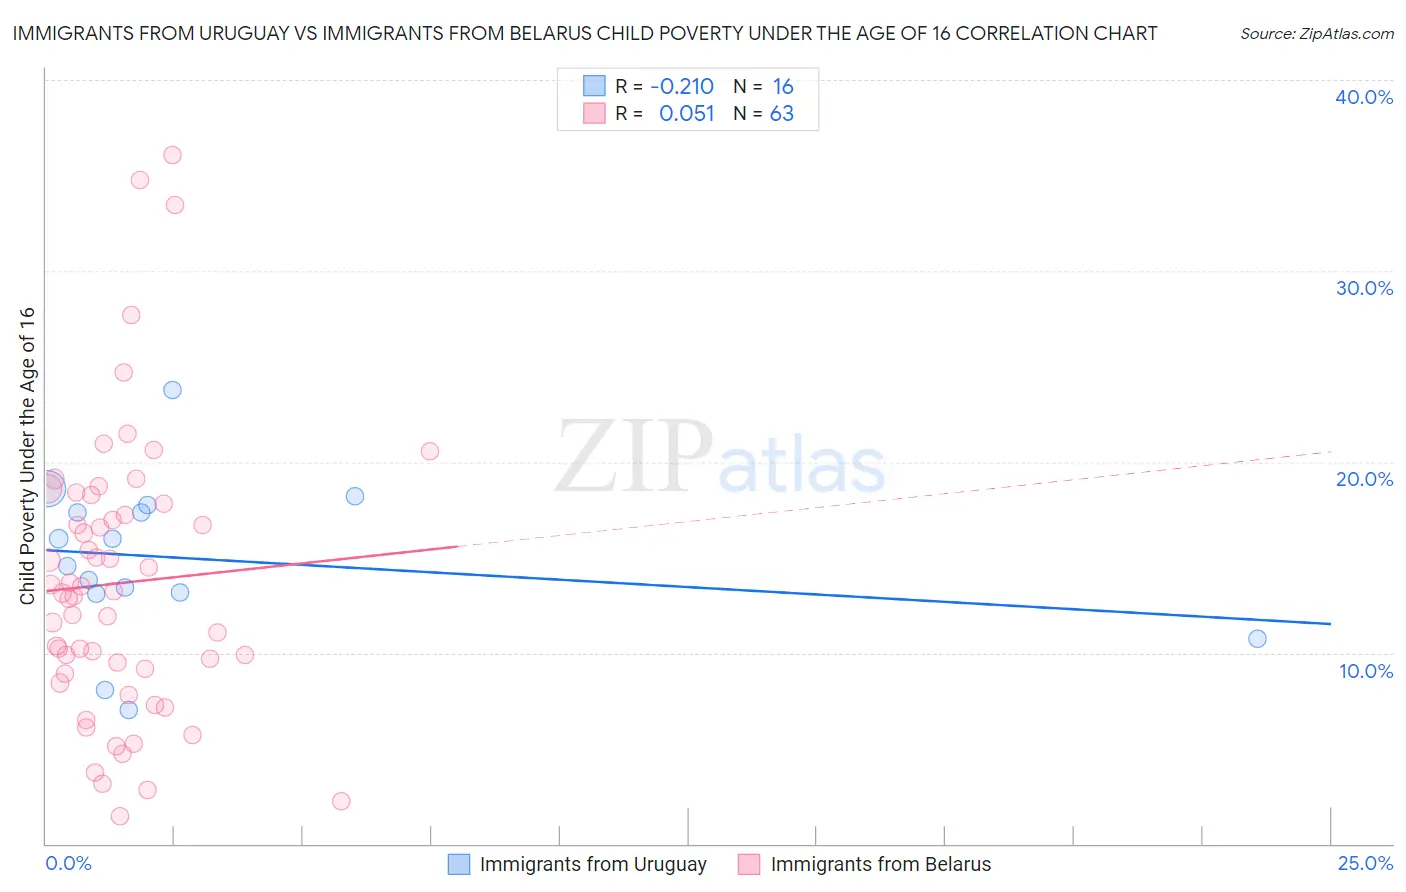 Immigrants from Uruguay vs Immigrants from Belarus Child Poverty Under the Age of 16